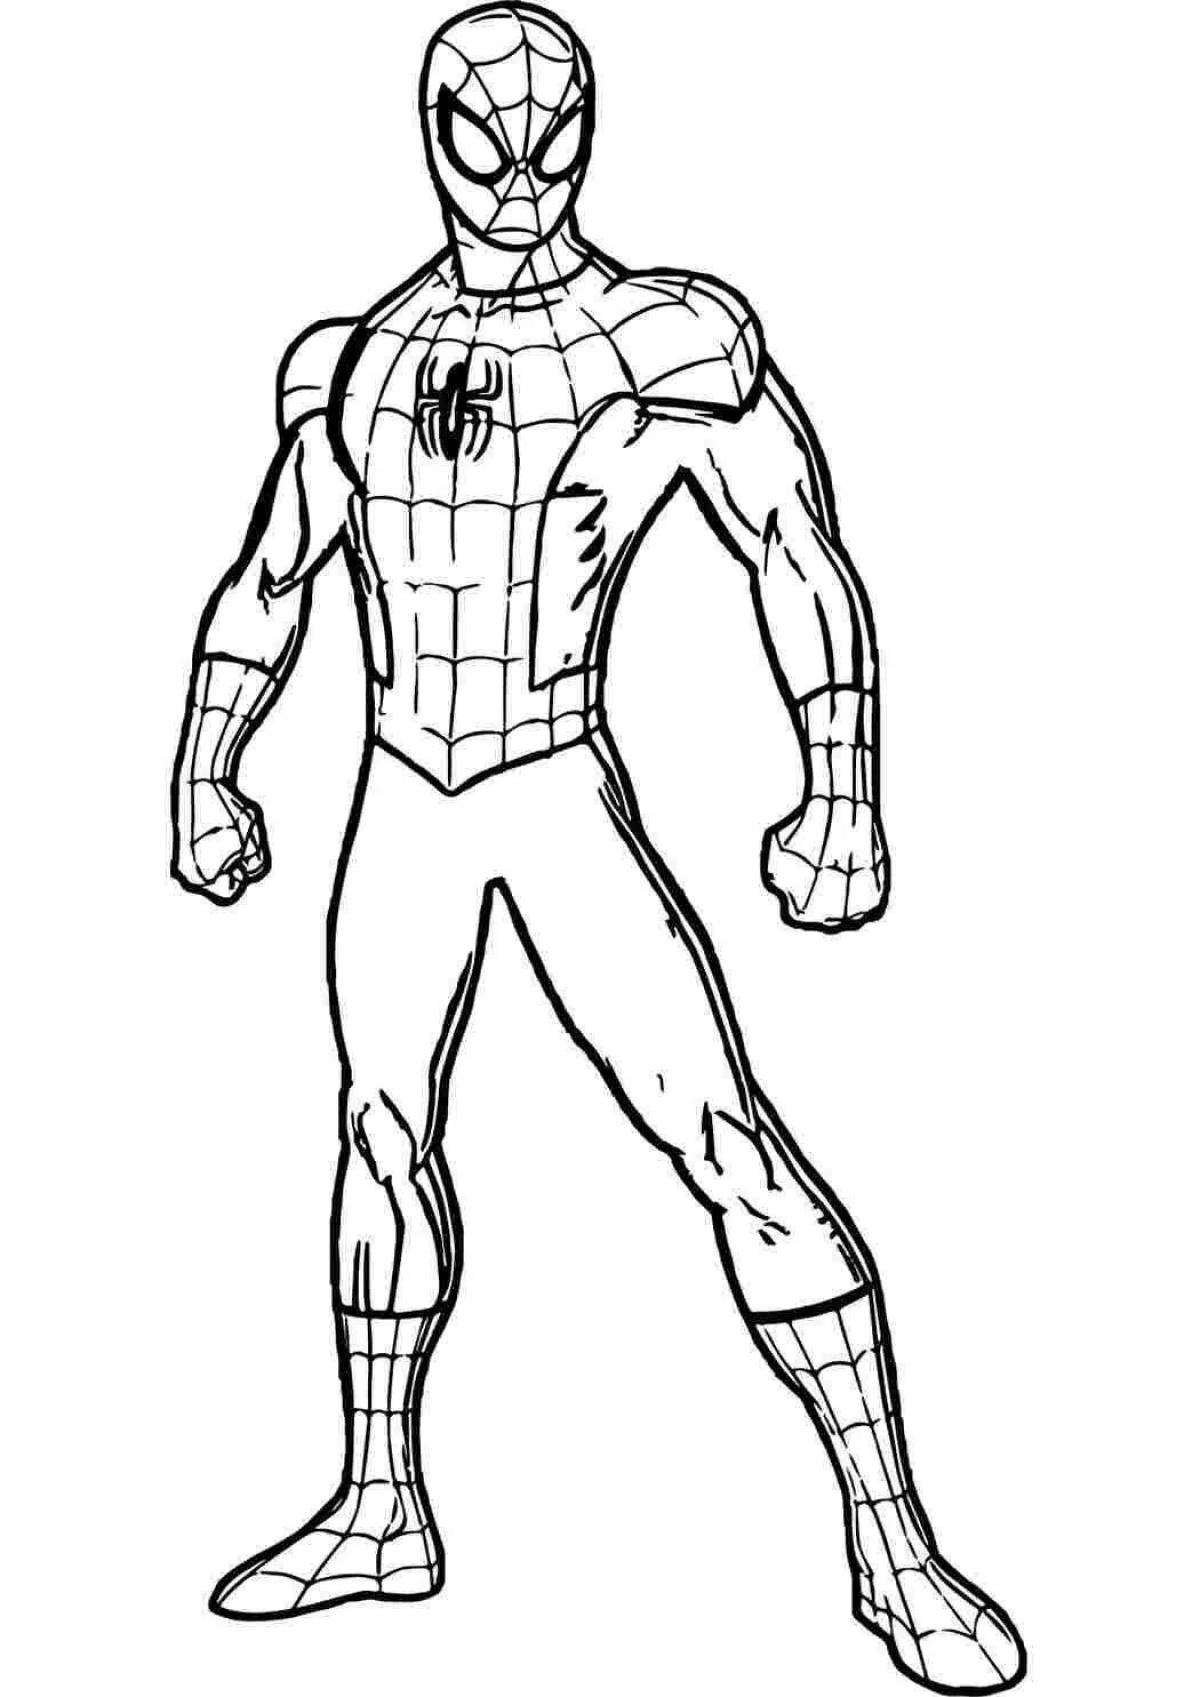 Spiderman coloring without decorations